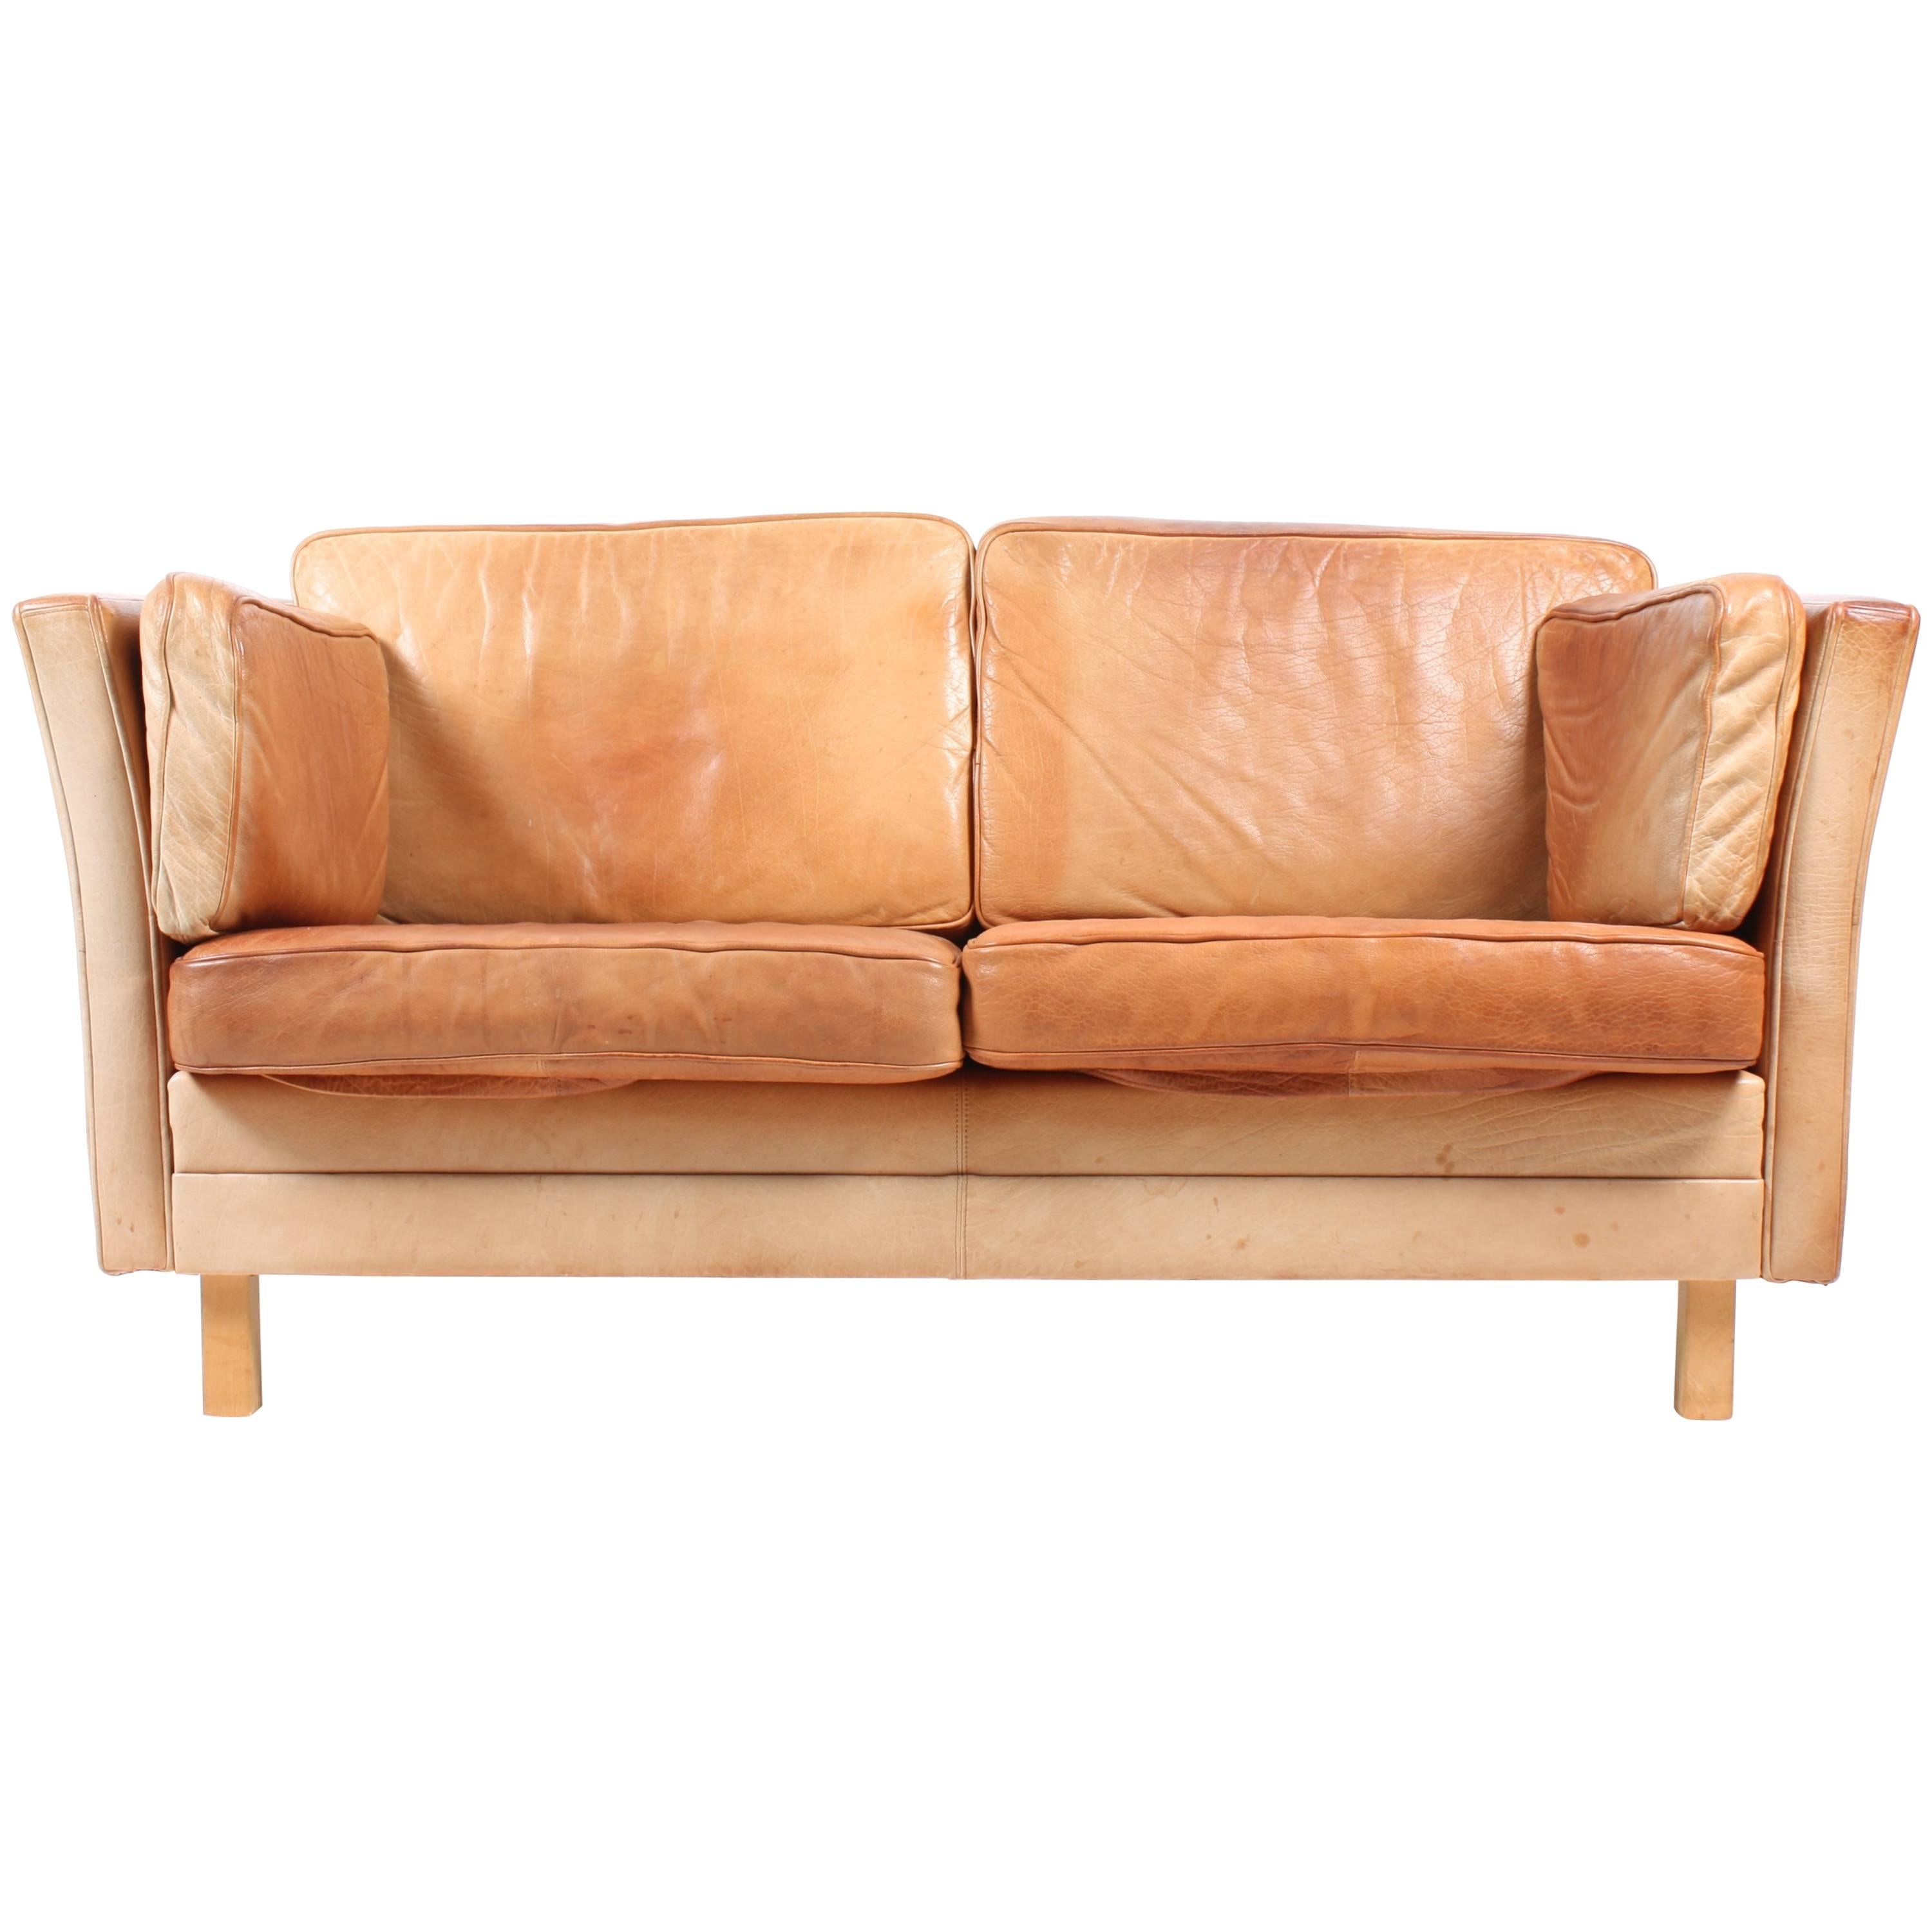 Danish Sofa in Patinated Leather